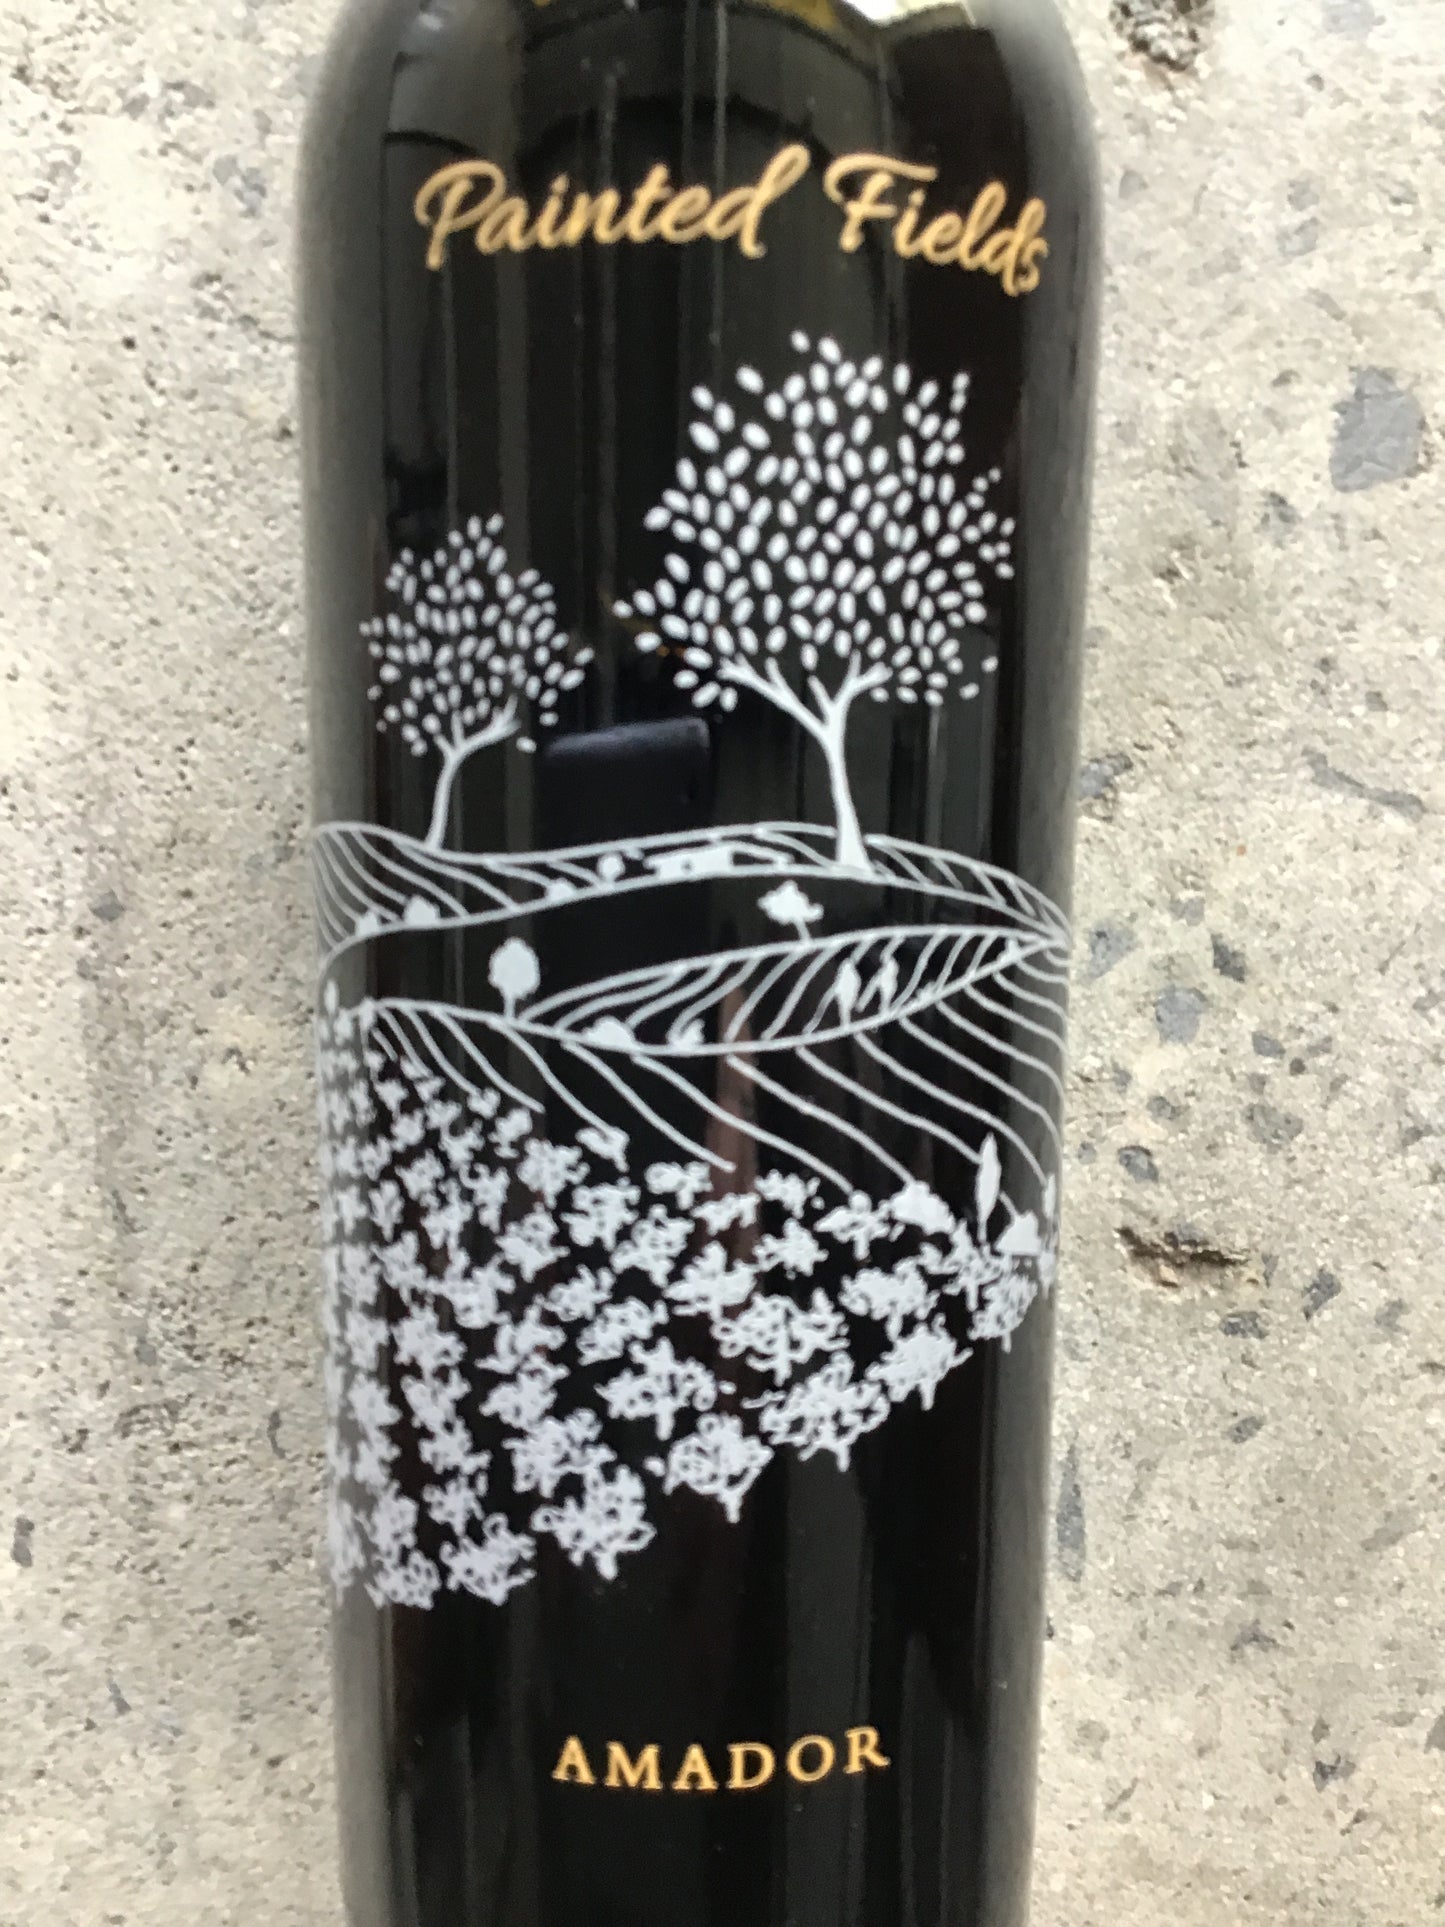 Andis 'Painted Fields' - Red Blend - Amador County